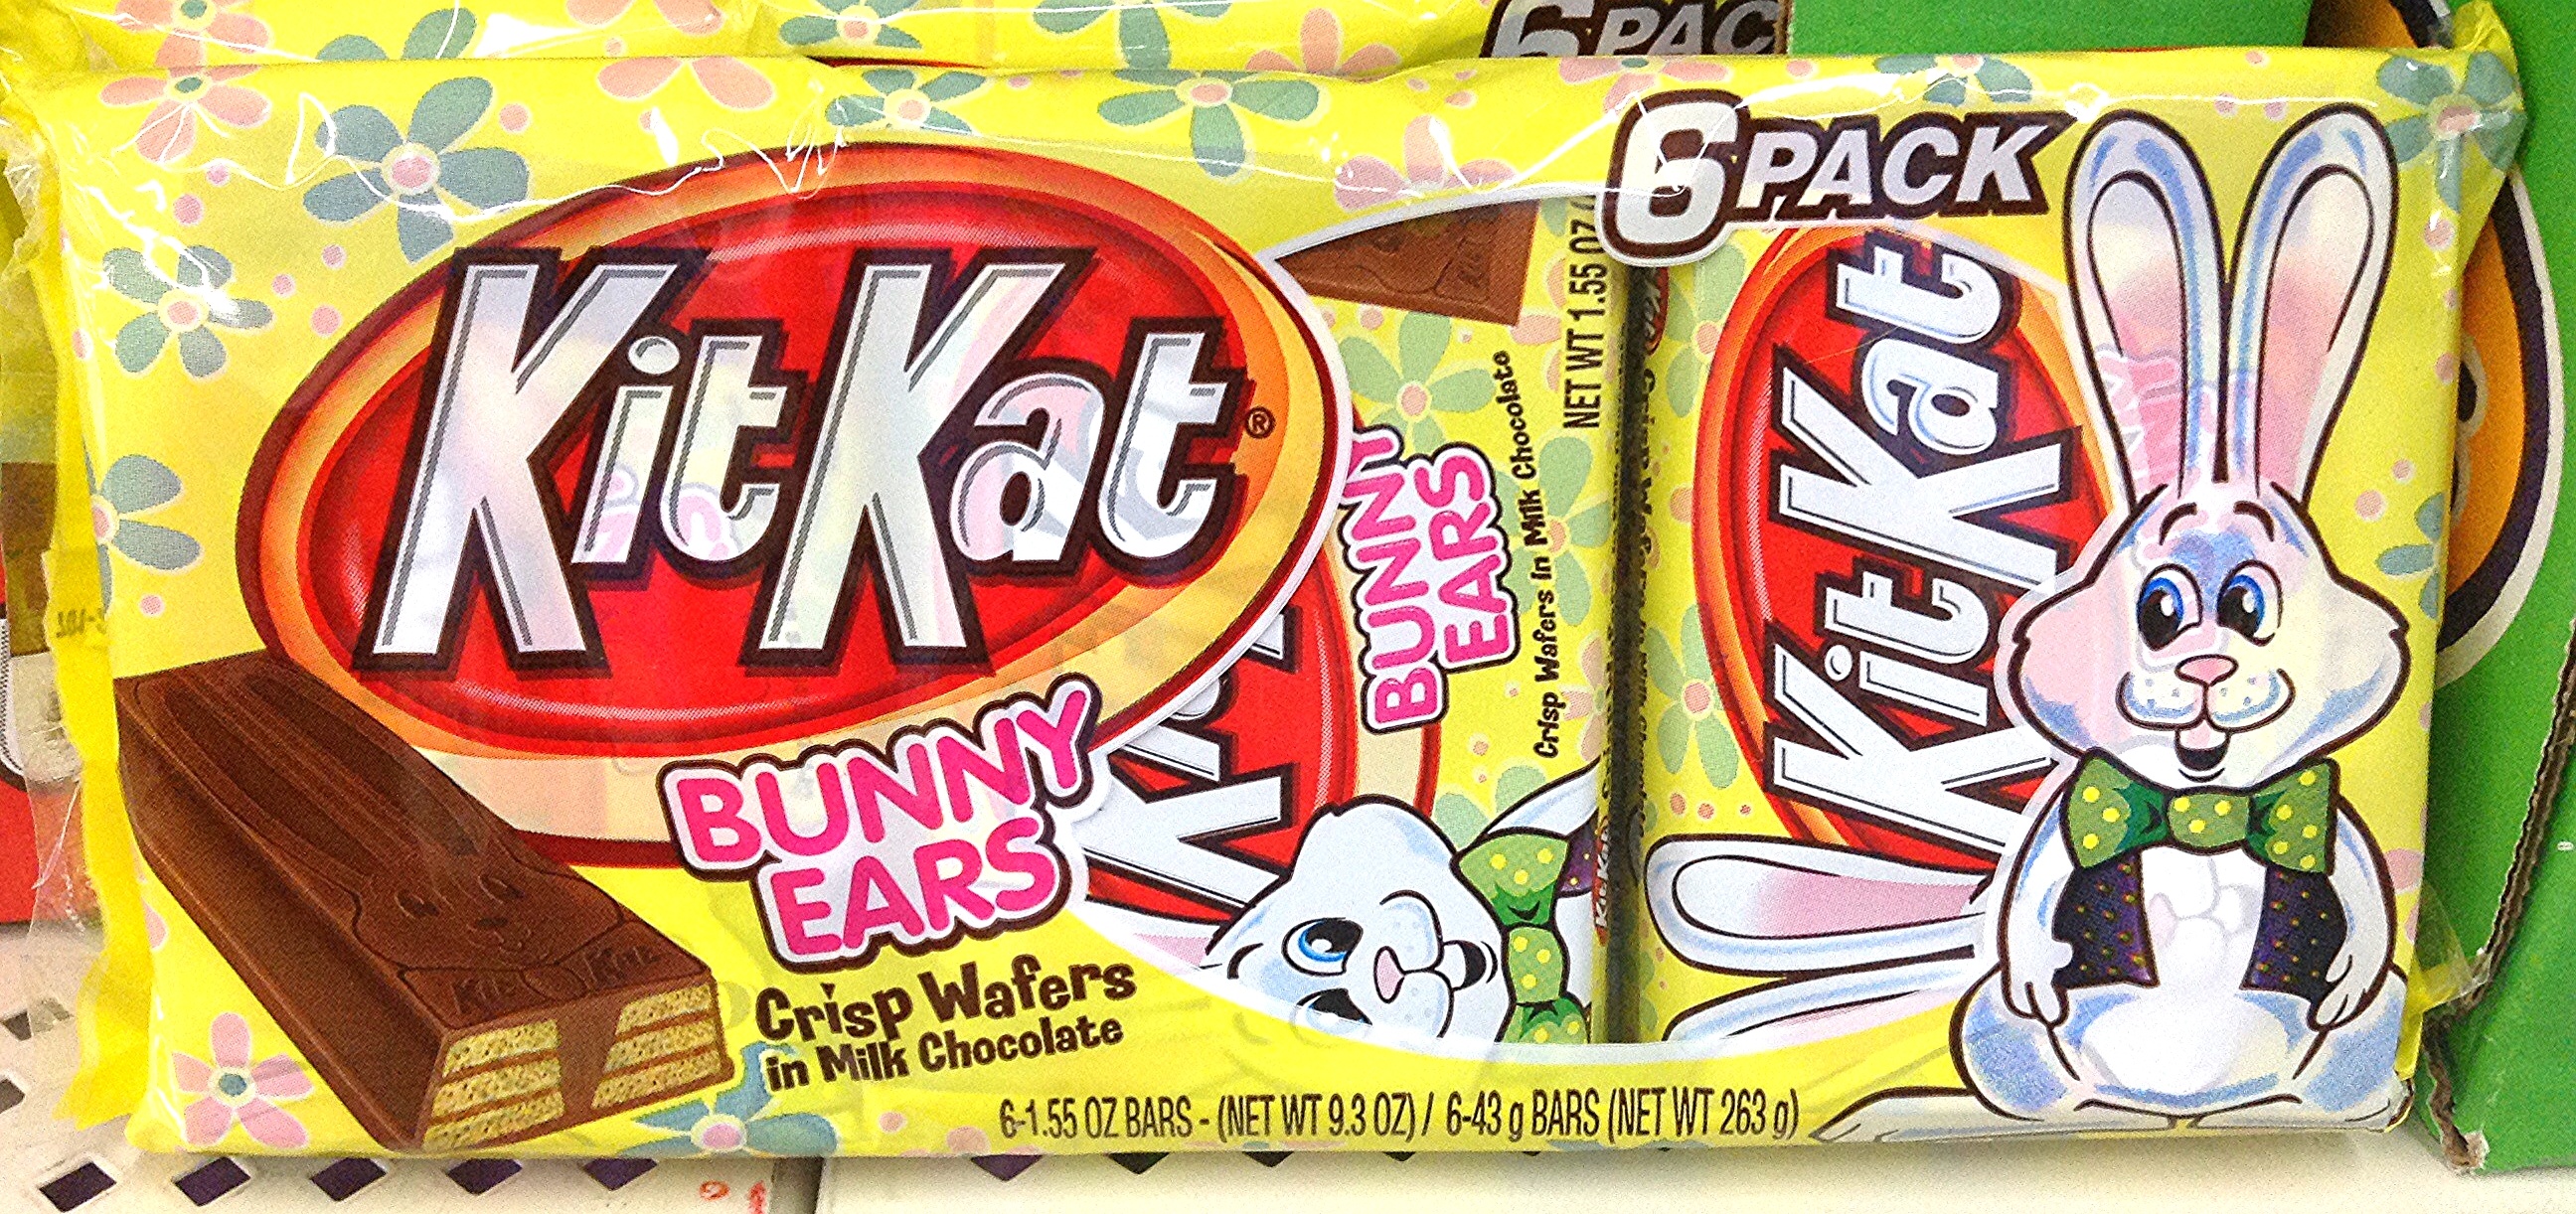 the front and side of a carton of ski - ja bunny ears